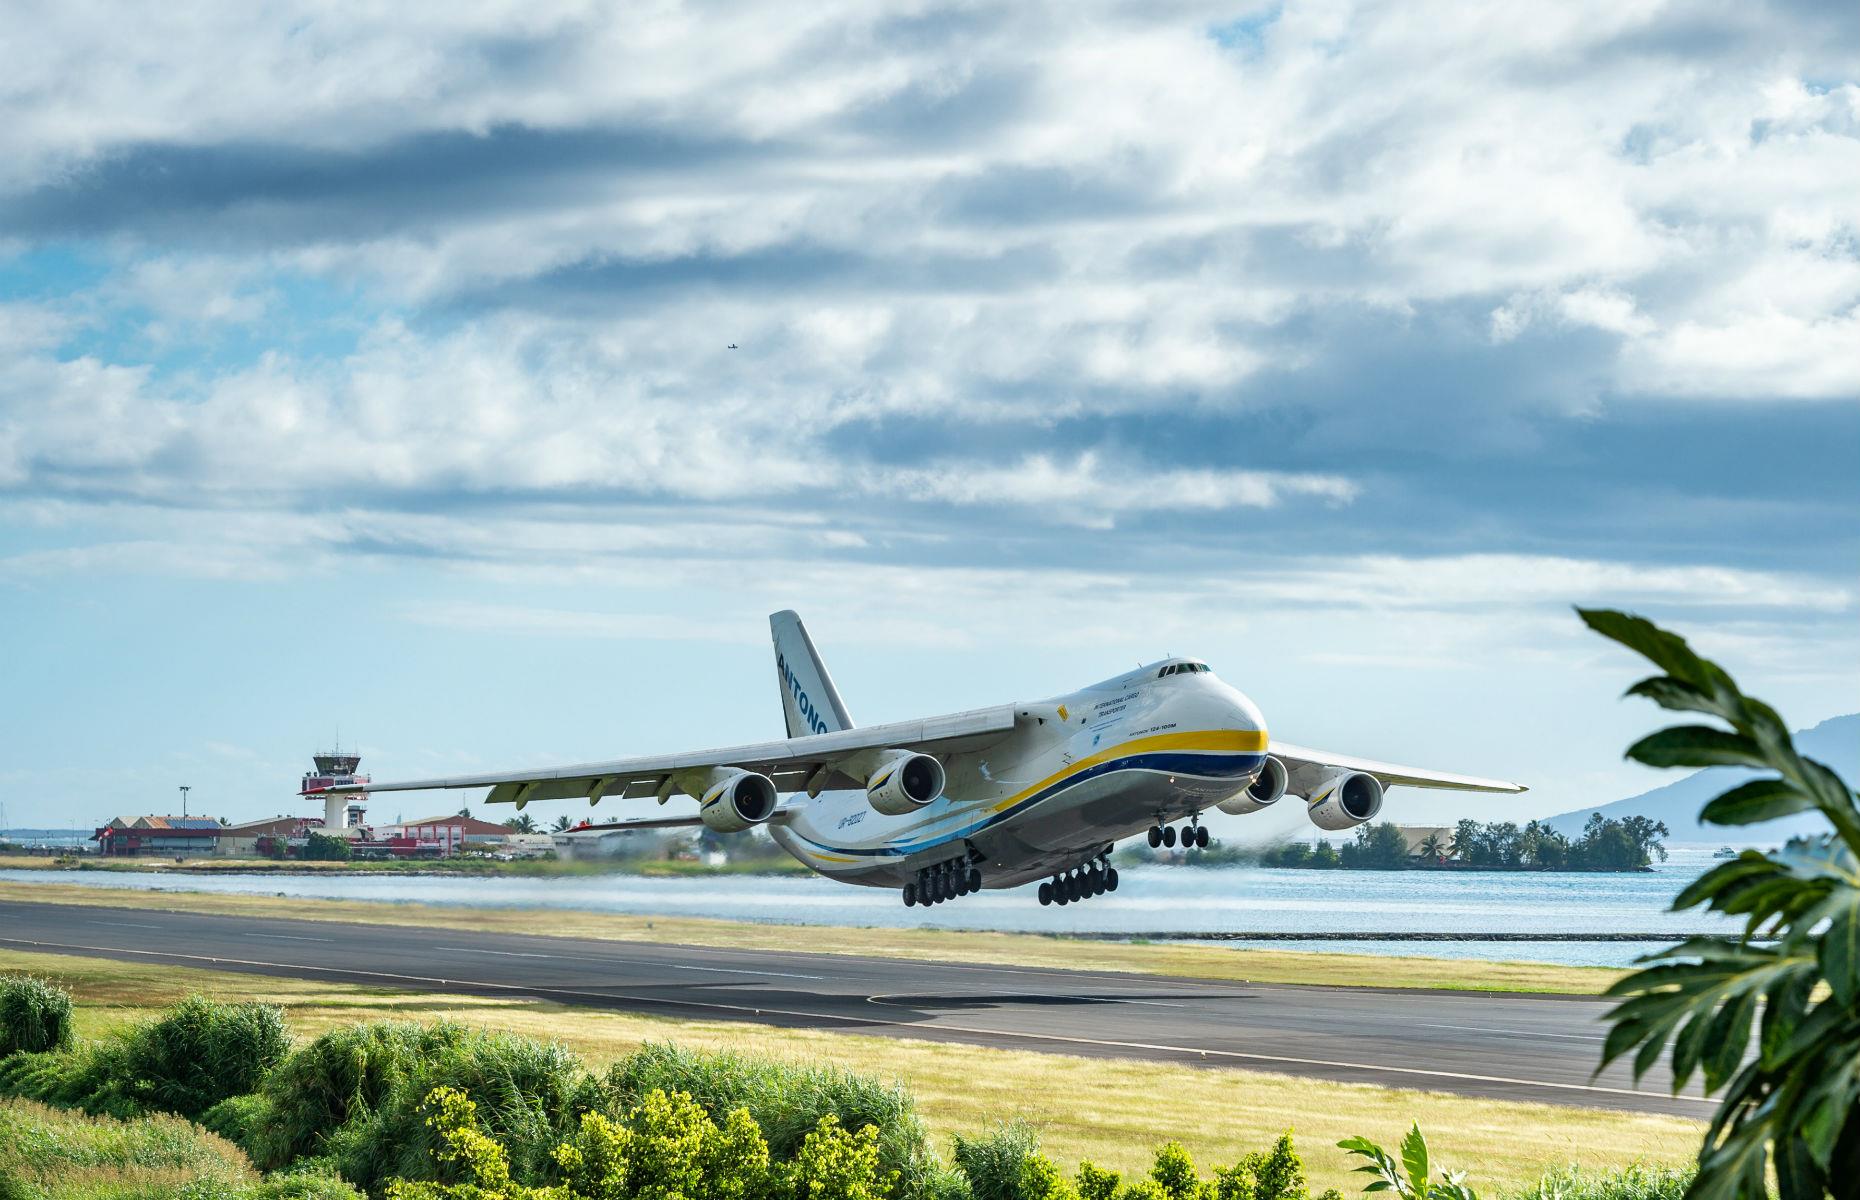 <p>These planes held numerous world records in their time, and their 227-foot (69m) length and 240-foot (73m) wingspan still rank among the world’s largest. Each AN-124 has its own onboard crane system that can lift up to 30 tonnes, making it easy to load and unload cargo safely at airports without the need for any special ground infrastructure.</p>